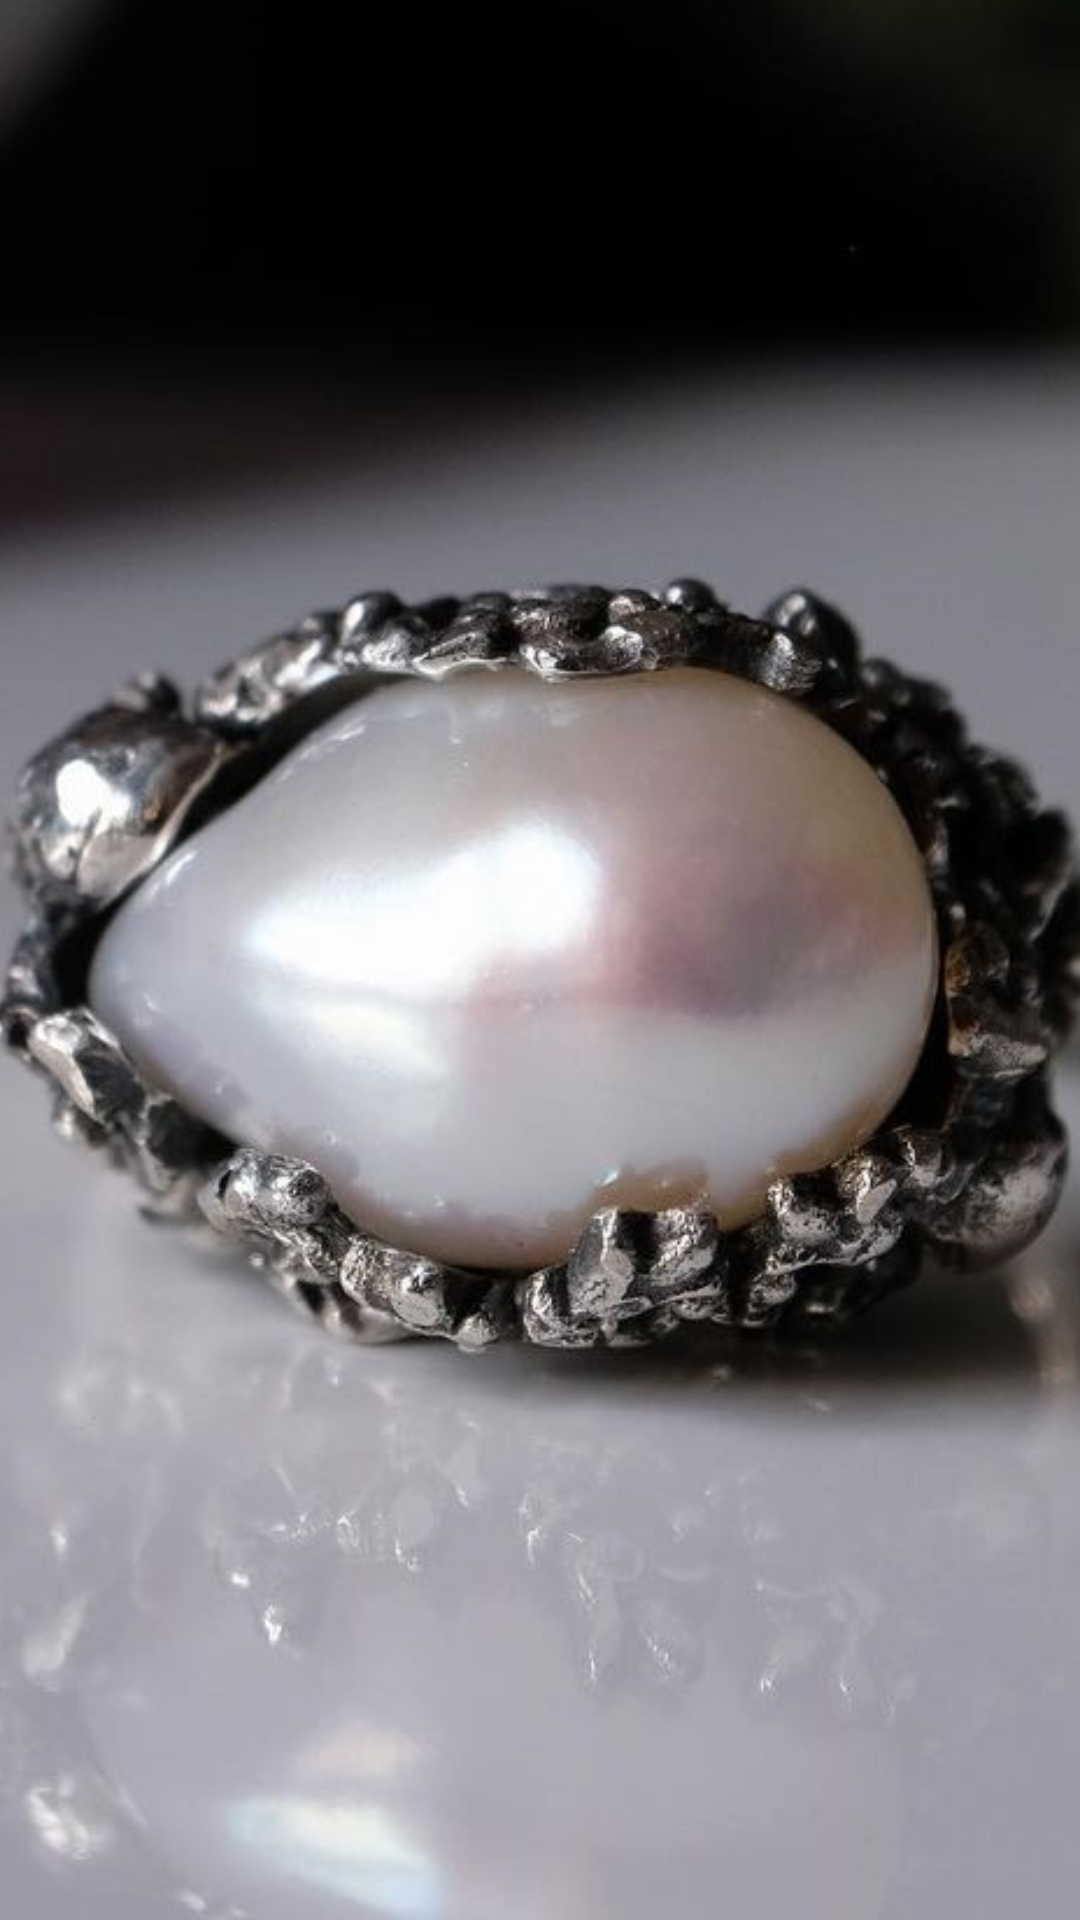 What are the benefits of wearing a pearl ring? - Quora